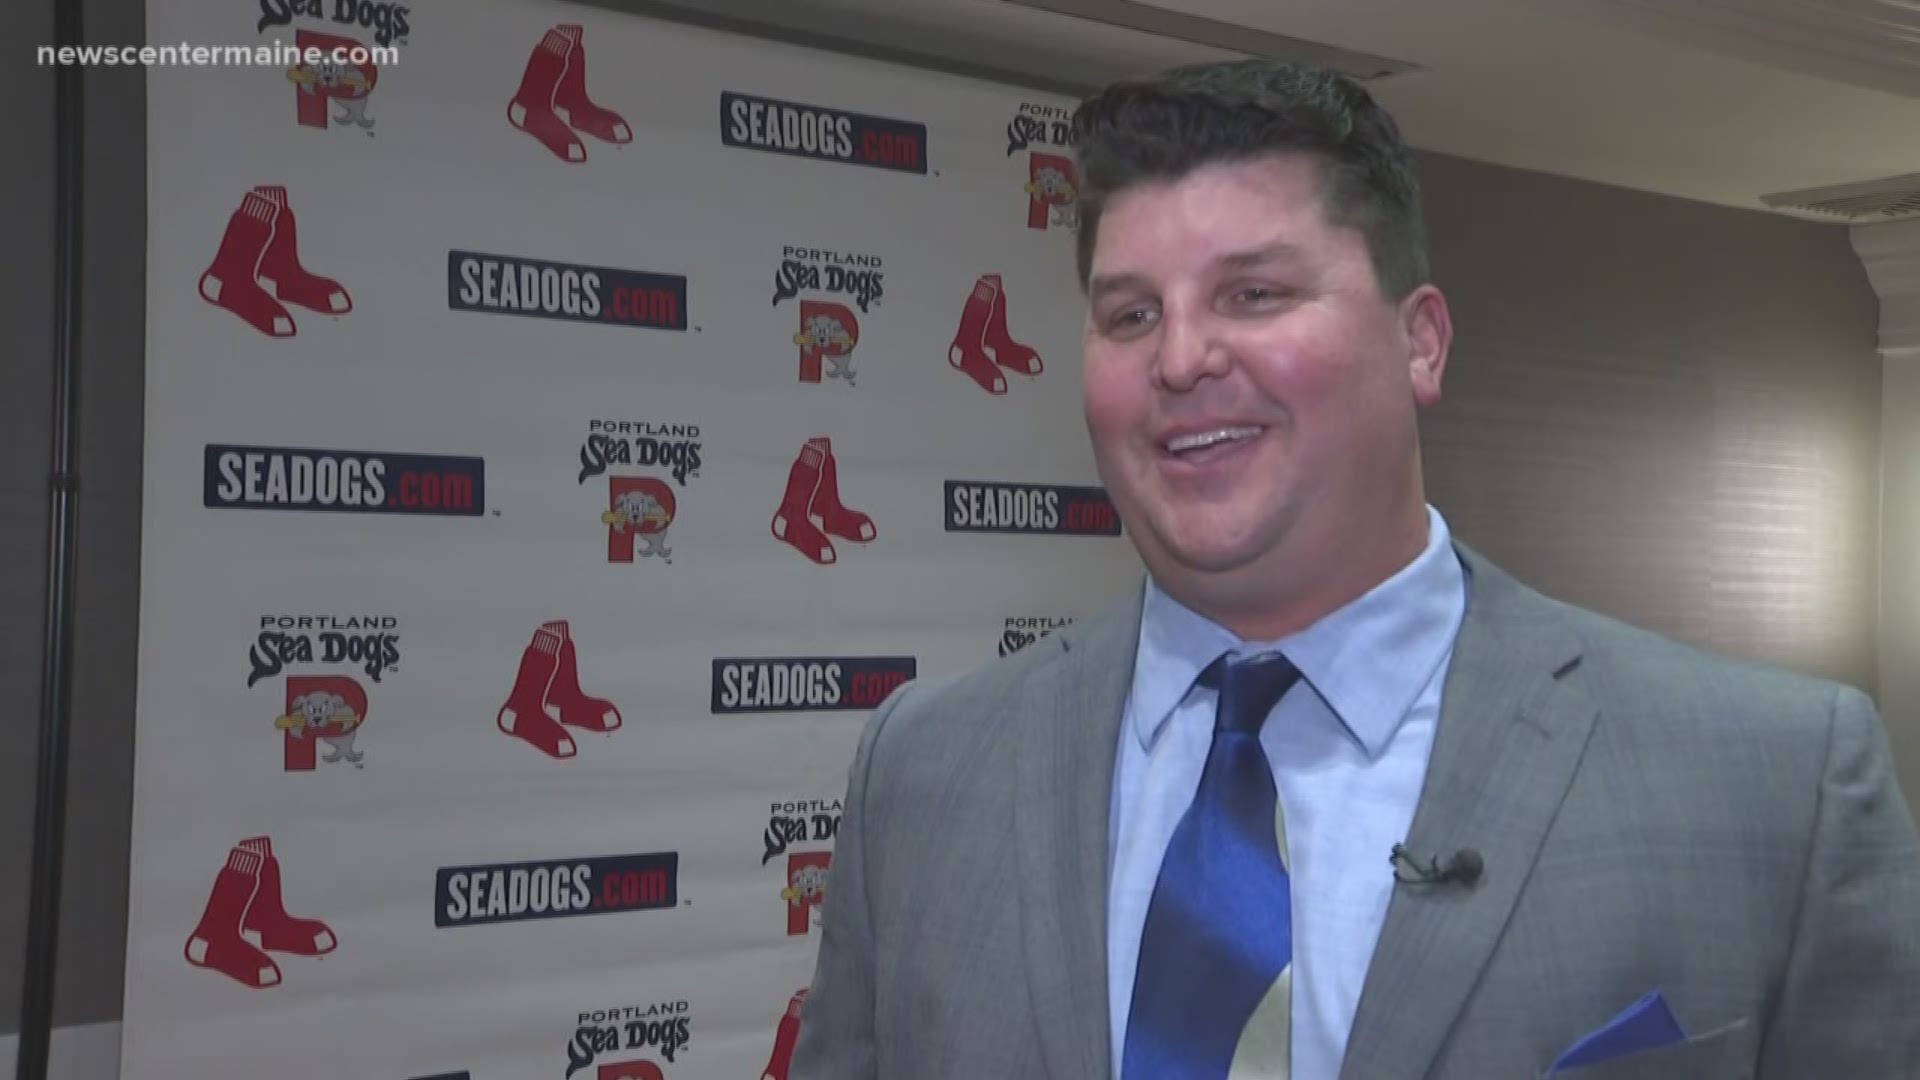 The Portland Sea Dogs hosted the Hot Stove dinner and silent auction before their 2019 season to benefit the Maine Children's Cancer Program.